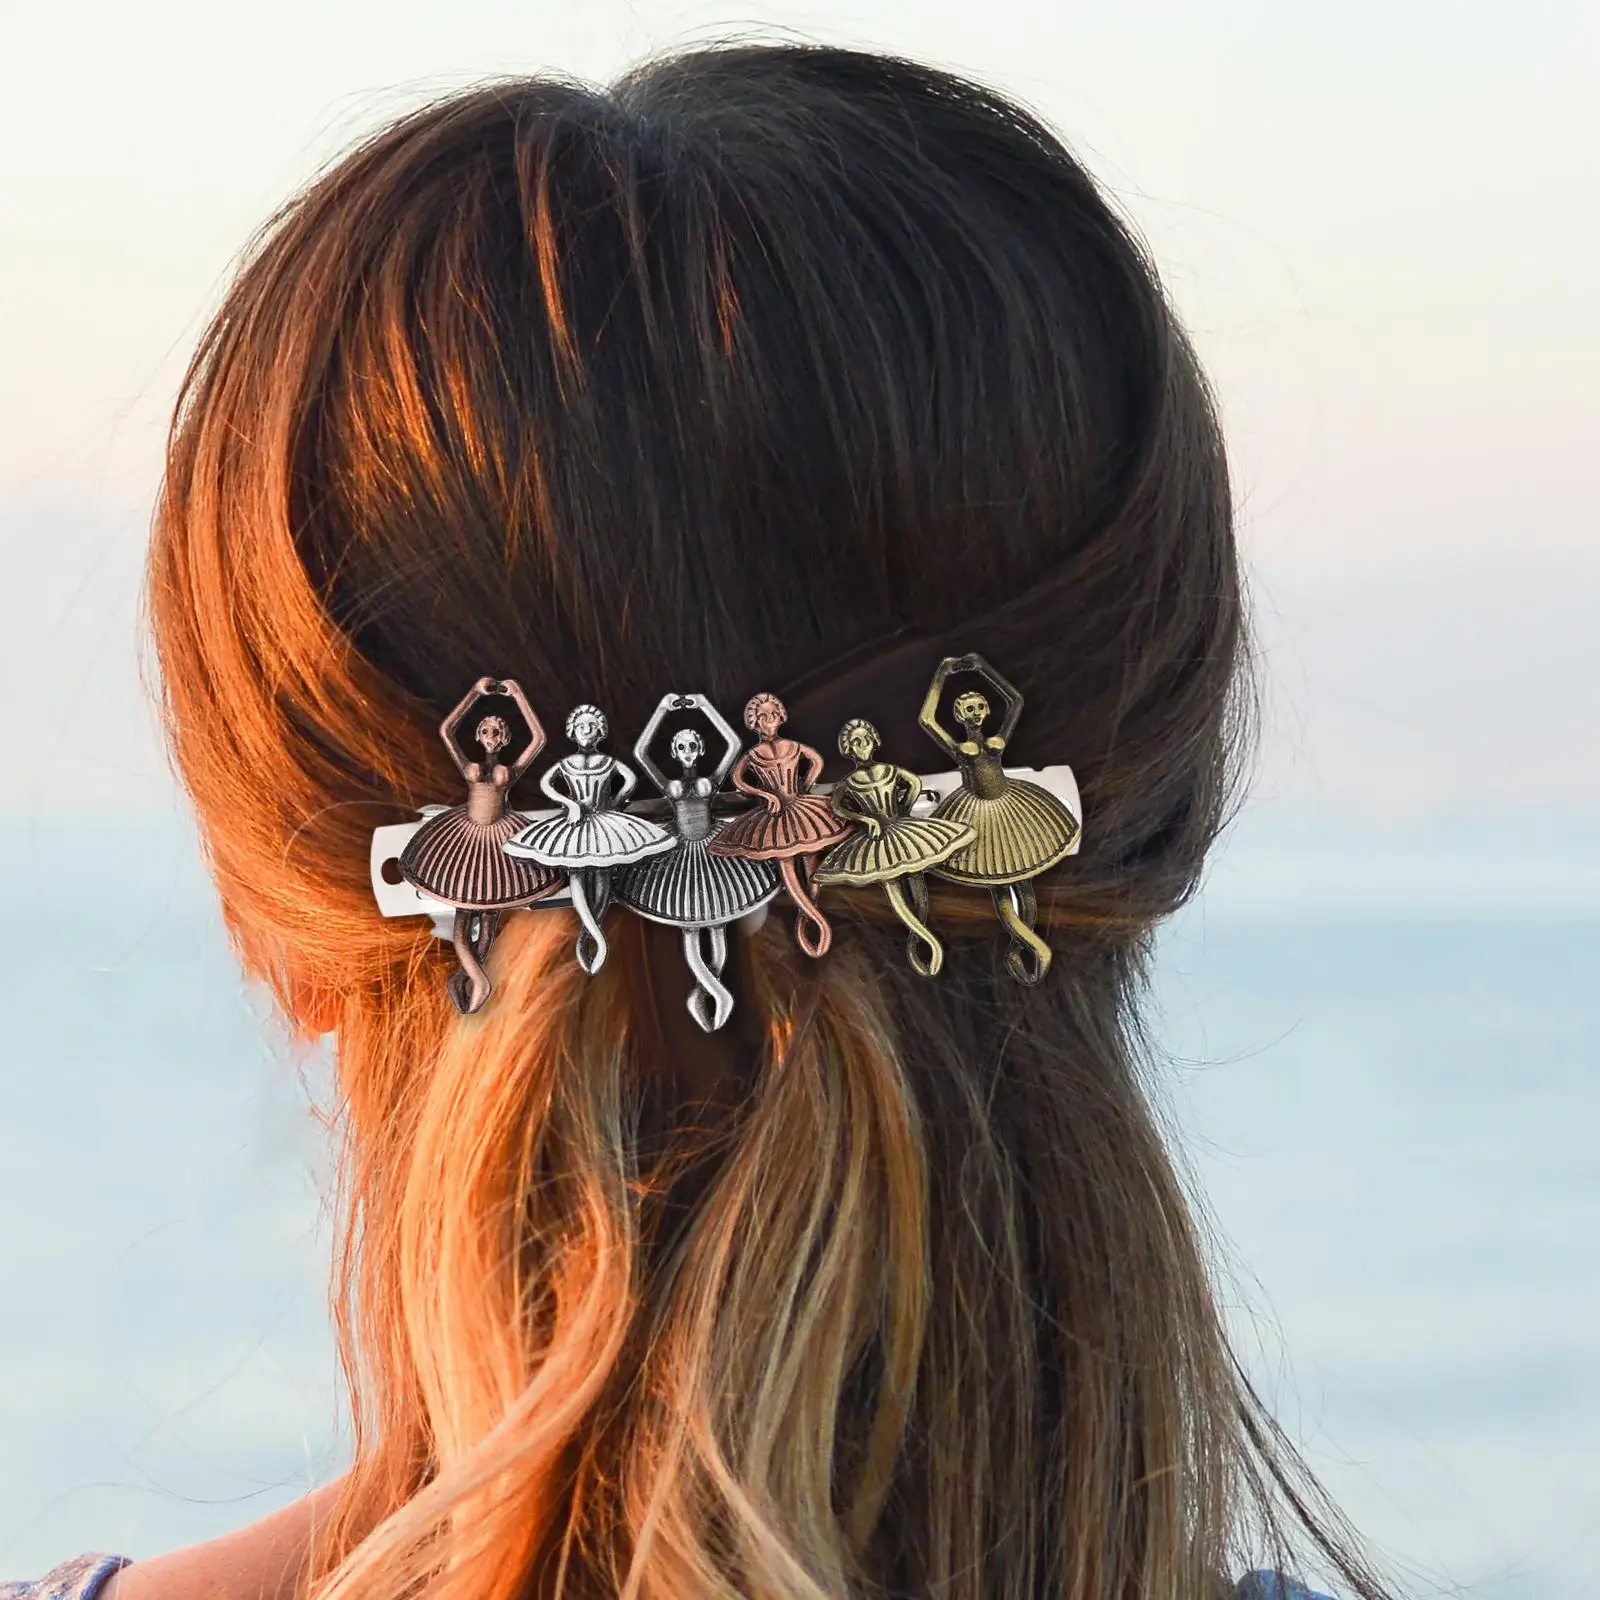 Hairpin Vintage Style Steampunk Alloy French Design Accessories Hair Clip for Women Short Hair Hair Styling Female Party